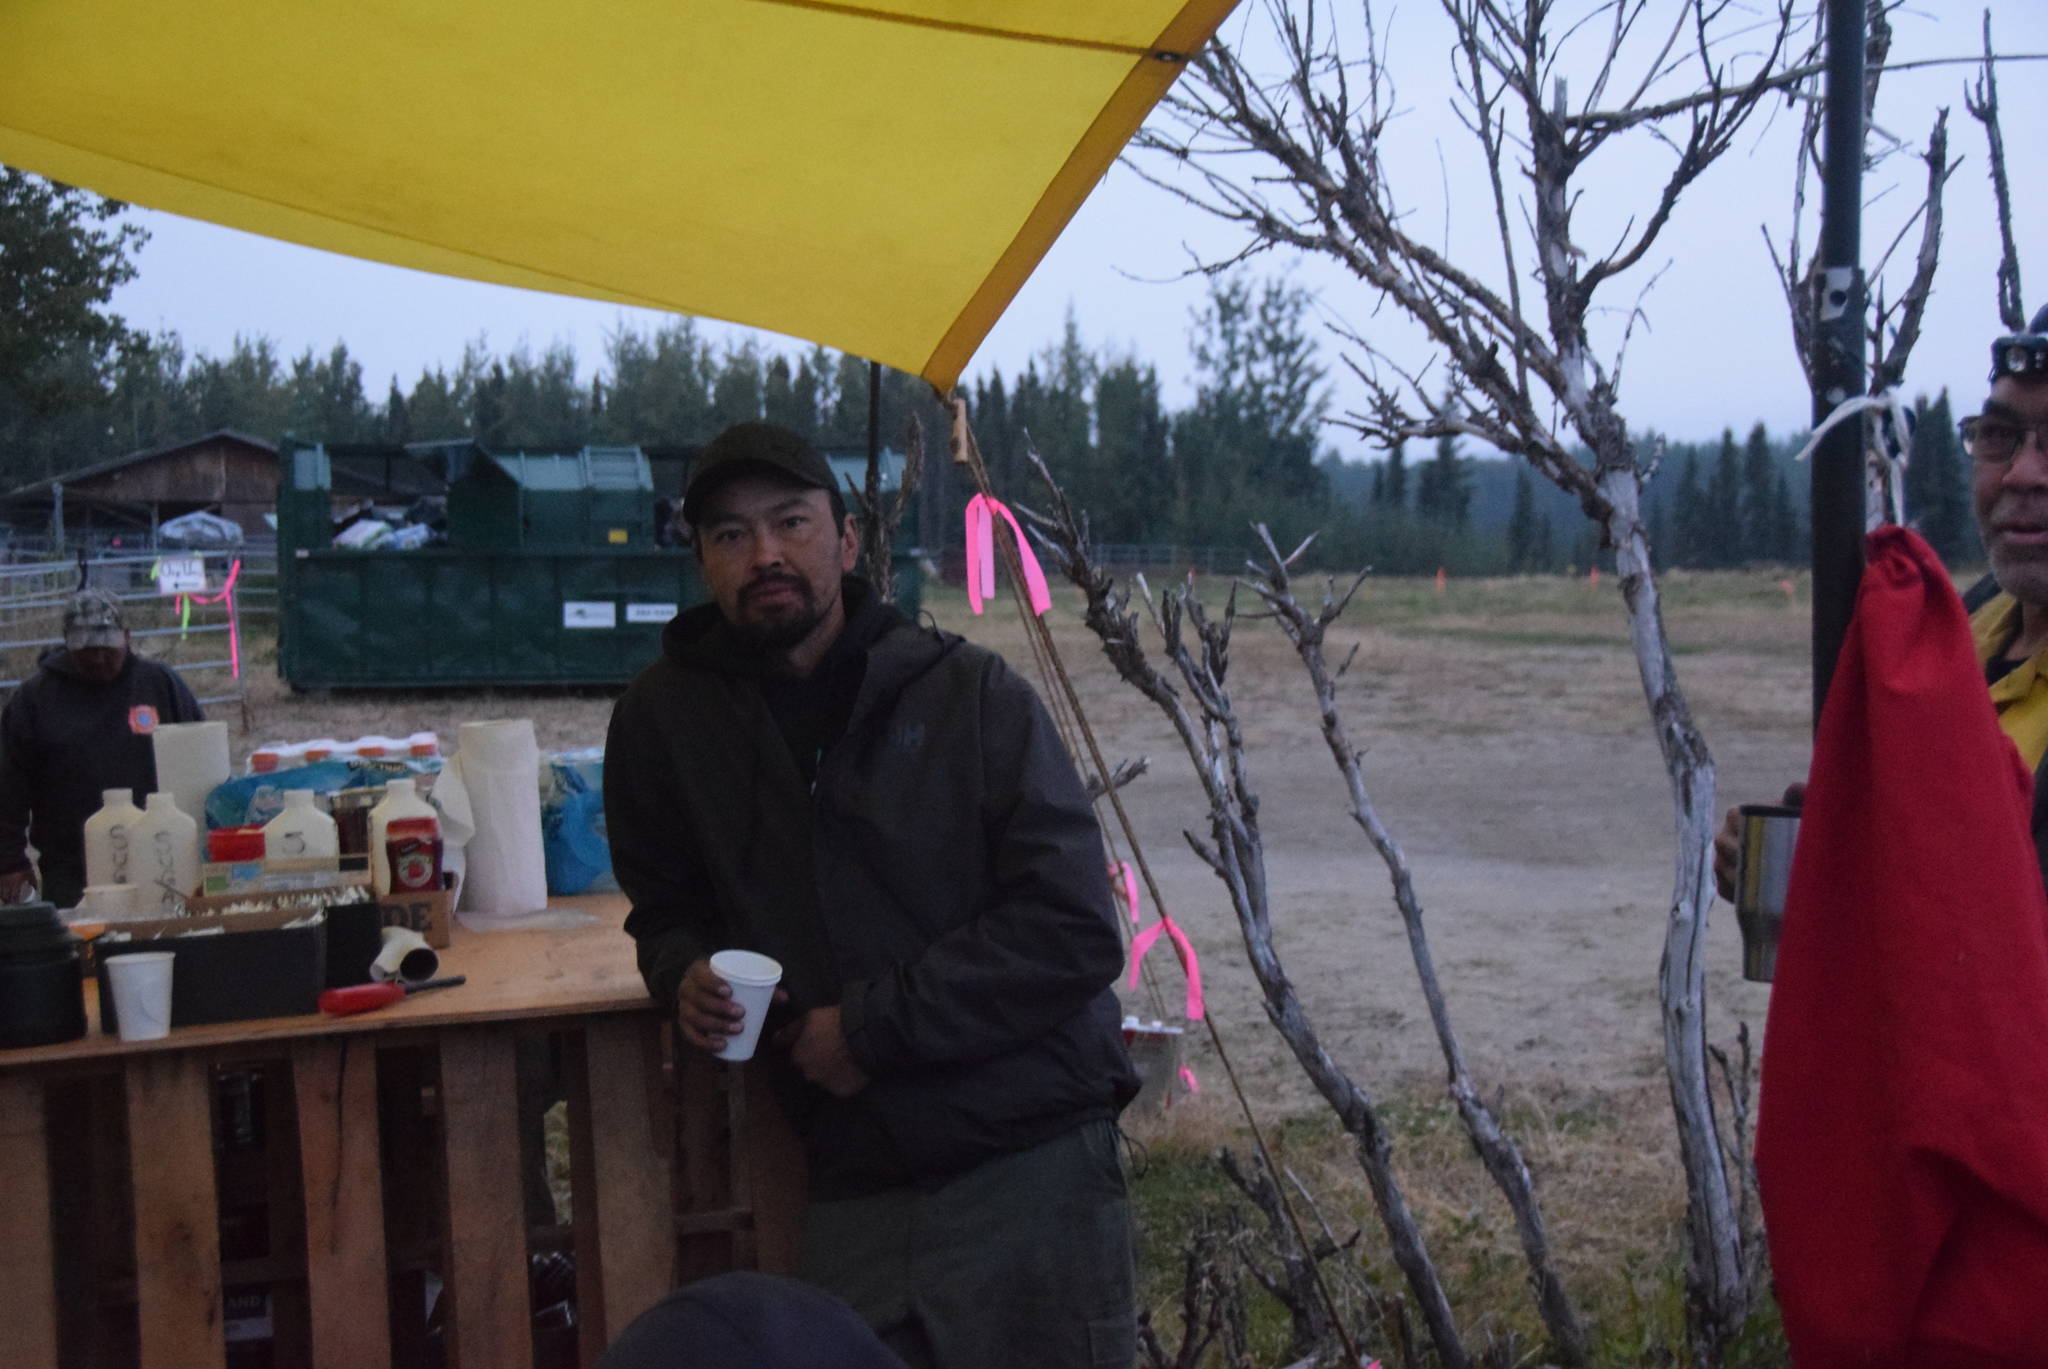 Victor Williams, a firefighter from Ruby, Alaska, drinks his coffee before the morning briefing at the Otter Creek Spike Camp 5 miles north of Sterling, Alaska on Aug. 30, 2019. (Photo by Brian Mazurek/Peninsula Clarion)